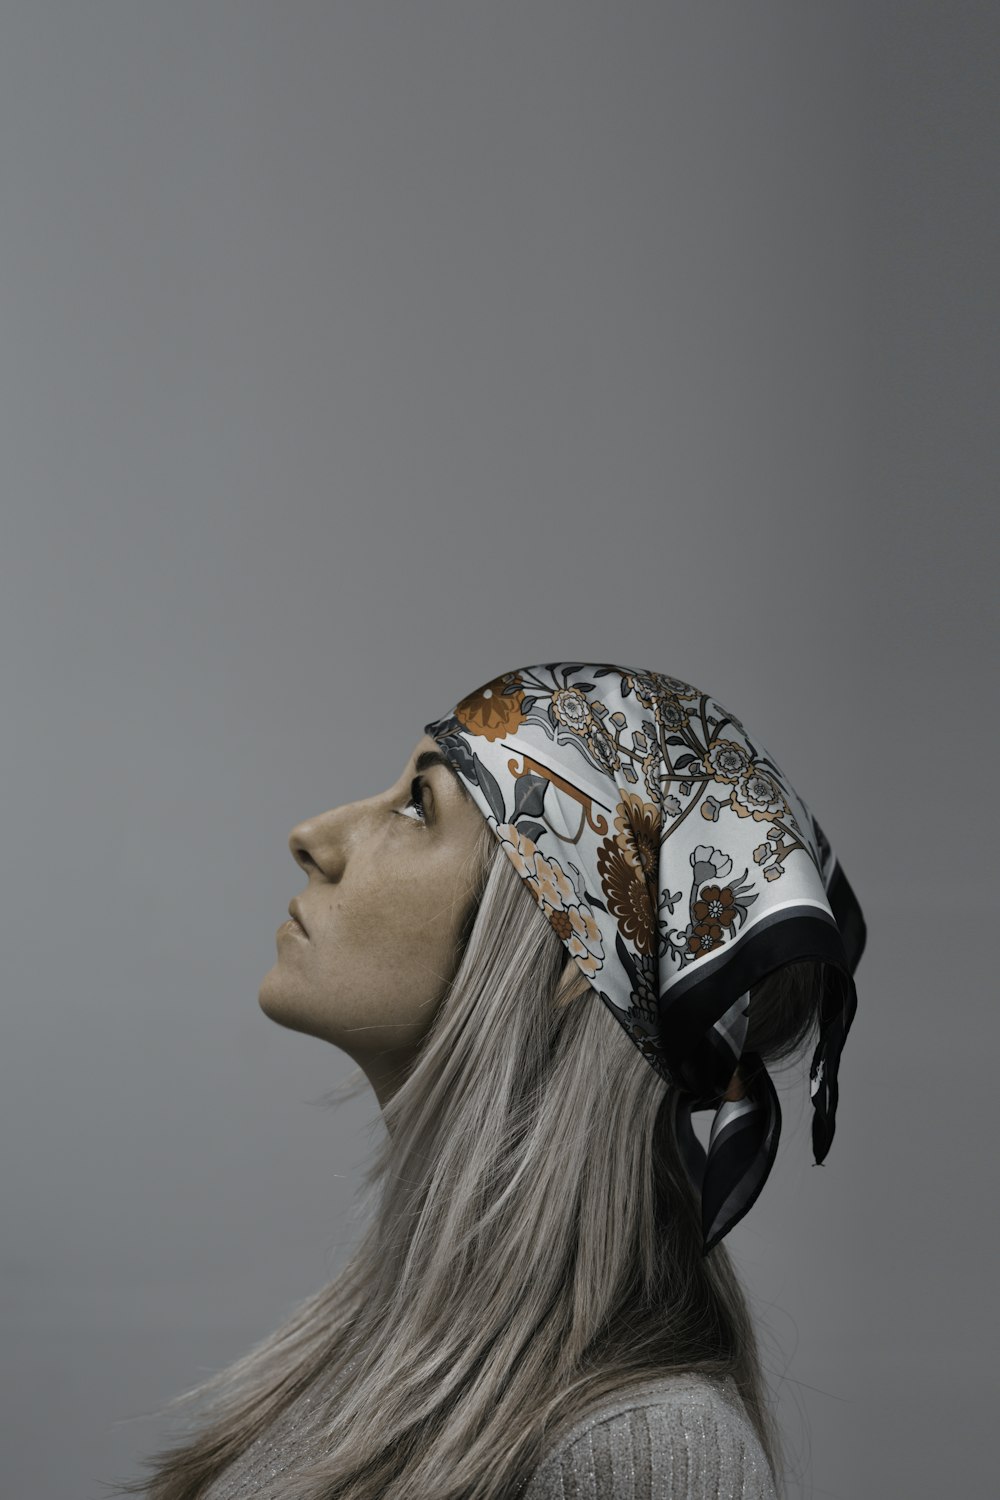 a woman with long hair wearing a helmet